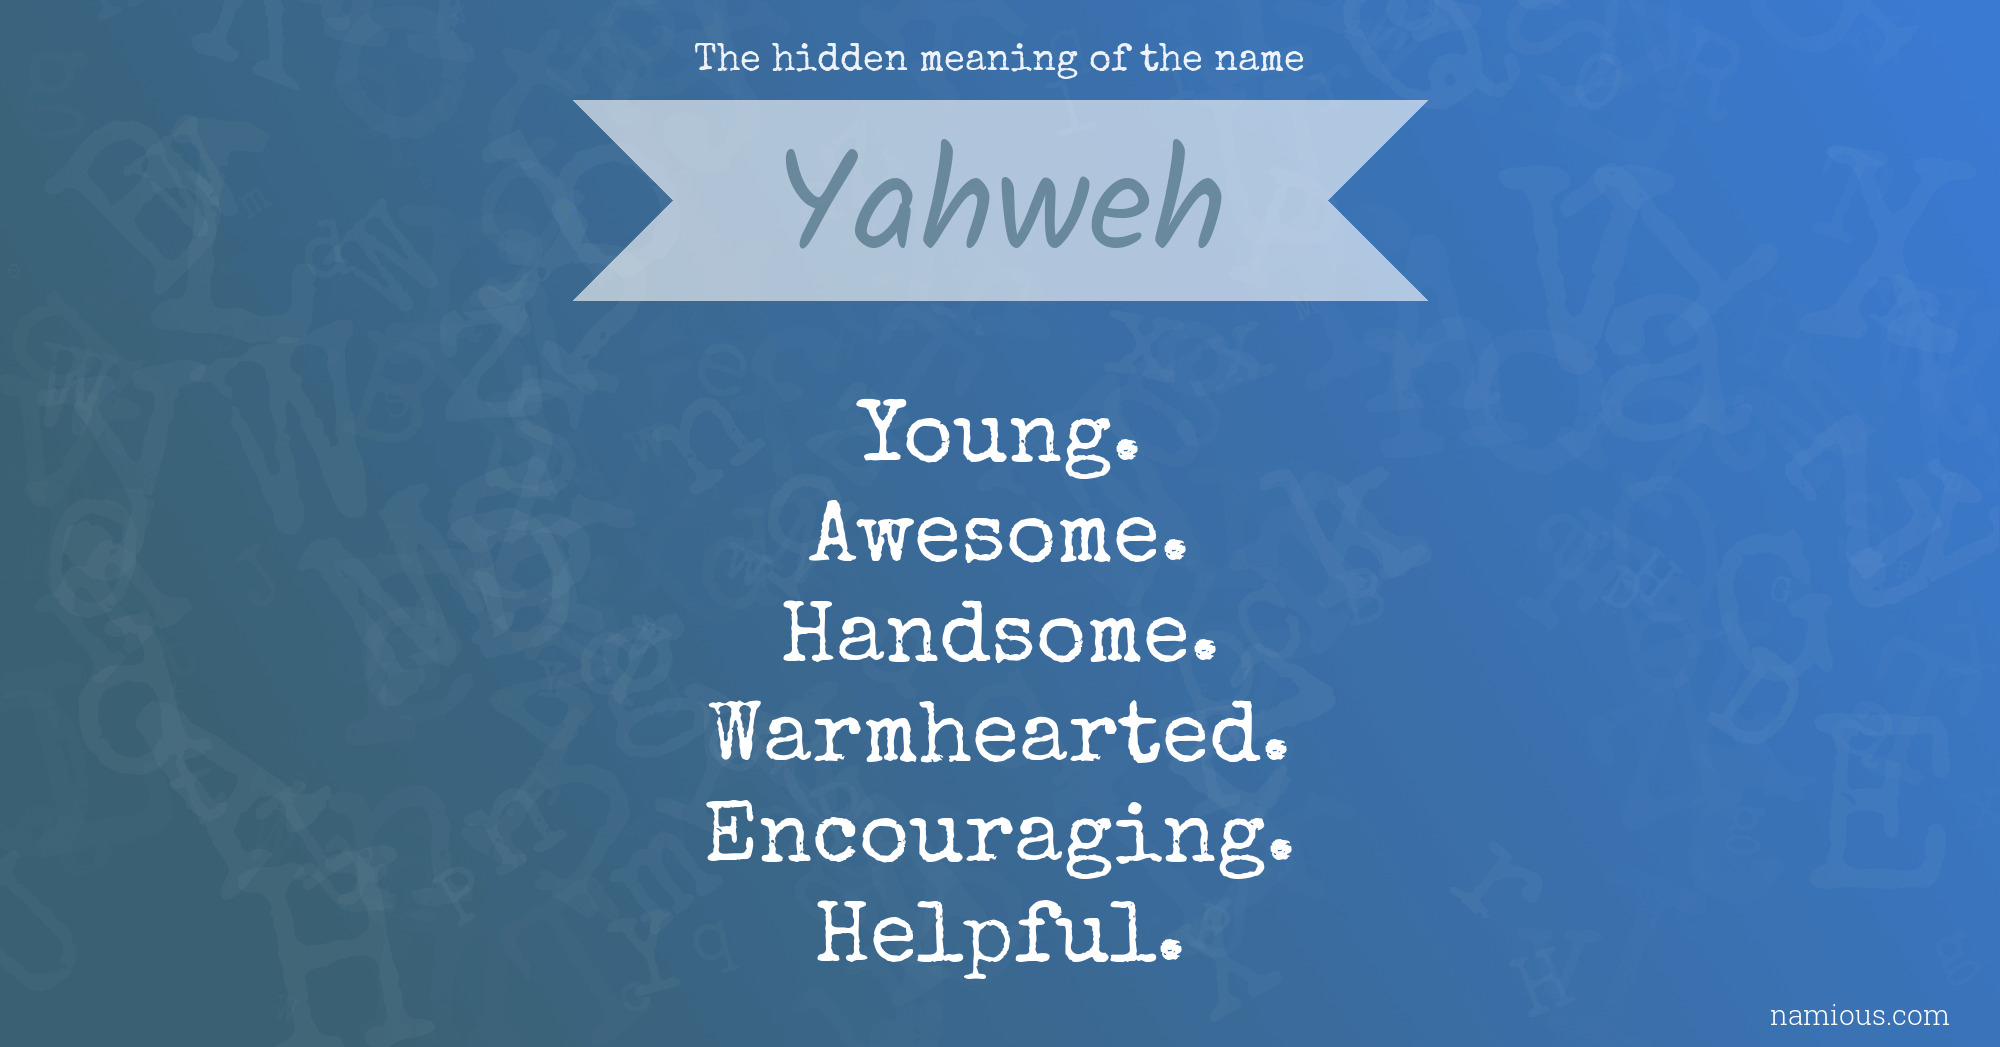 The hidden meaning of the name Yahweh